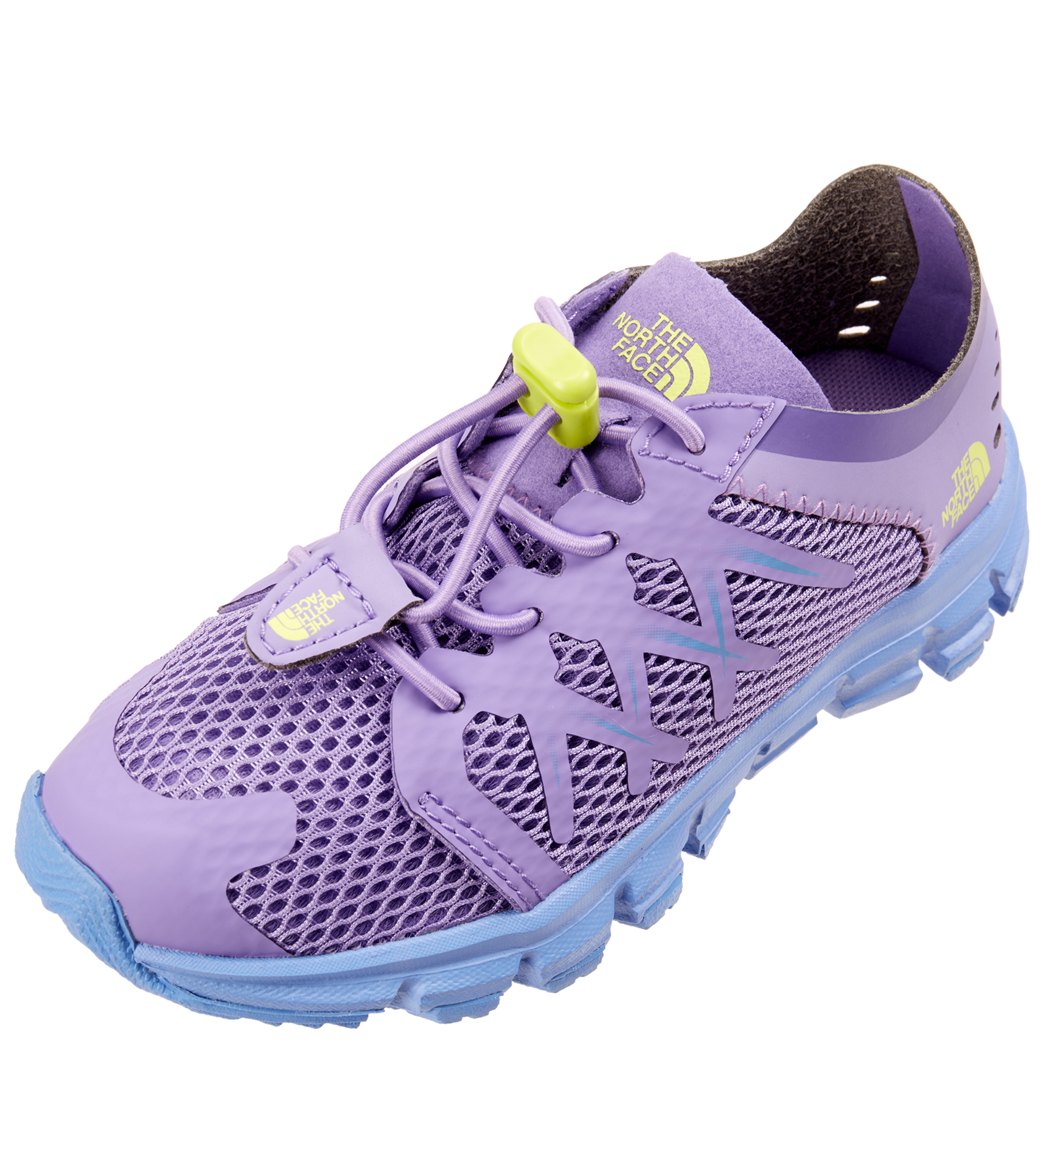 The North Face Youth's Litewave Flow Water Shoe Toddler - Paisley Purple/Rave Green 7 Foam/Polyurethane/Rubber - Swimoutlet.com